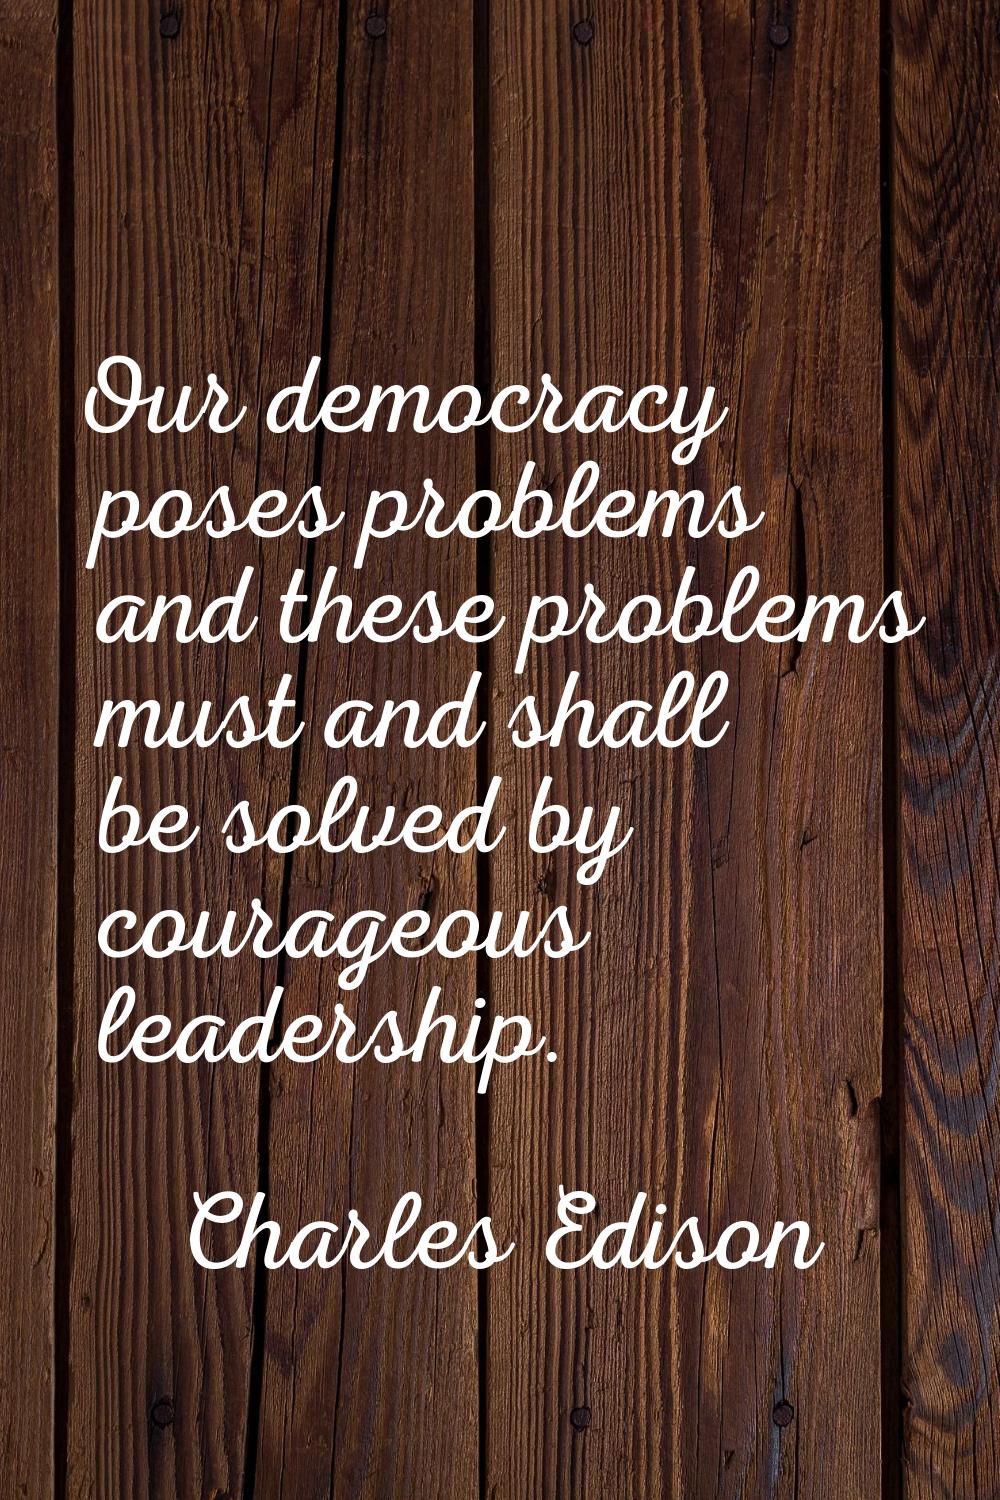 Our democracy poses problems and these problems must and shall be solved by courageous leadership.